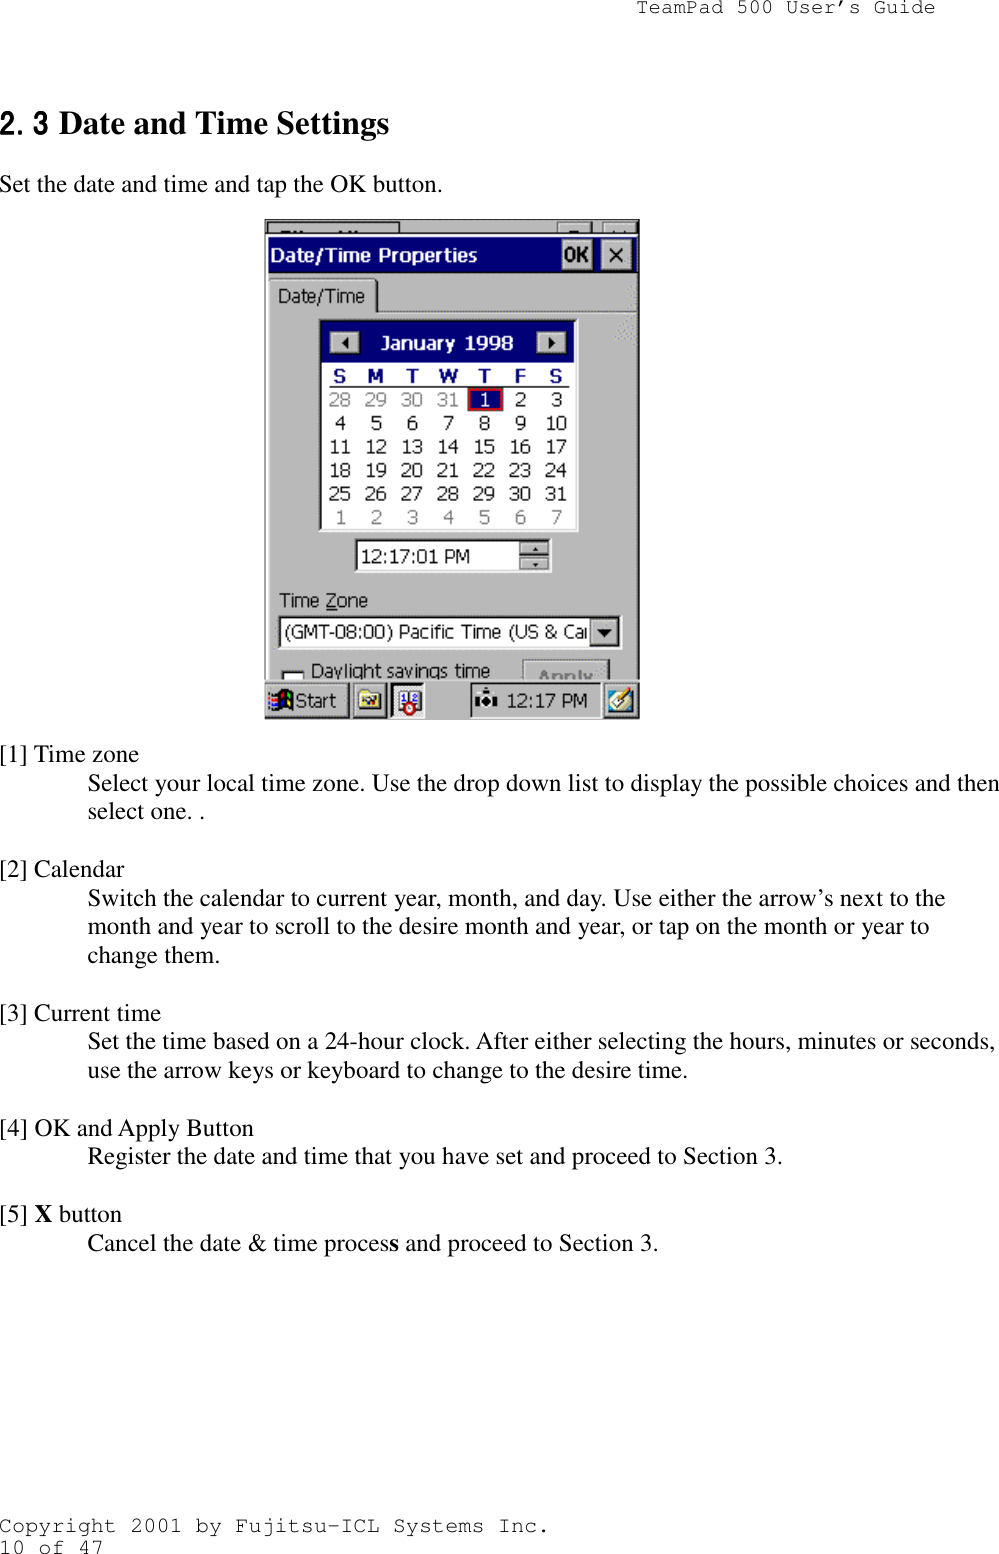                TeamPad 500 User’s GuideCopyright 2001 by Fujitsu-ICL Systems Inc.10 of 472.32.32.32.3 Date and Time SettingsSet the date and time and tap the OK button.         [1] Time zoneSelect your local time zone. Use the drop down list to display the possible choices and thenselect one. .[2] CalendarSwitch the calendar to current year, month, and day. Use either the arrow’s next to themonth and year to scroll to the desire month and year, or tap on the month or year tochange them.[3] Current timeSet the time based on a 24-hour clock. After either selecting the hours, minutes or seconds,use the arrow keys or keyboard to change to the desire time.[4] OK and Apply ButtonRegister the date and time that you have set and proceed to Section 3.[5] X buttonCancel the date &amp; time process and proceed to Section 3.